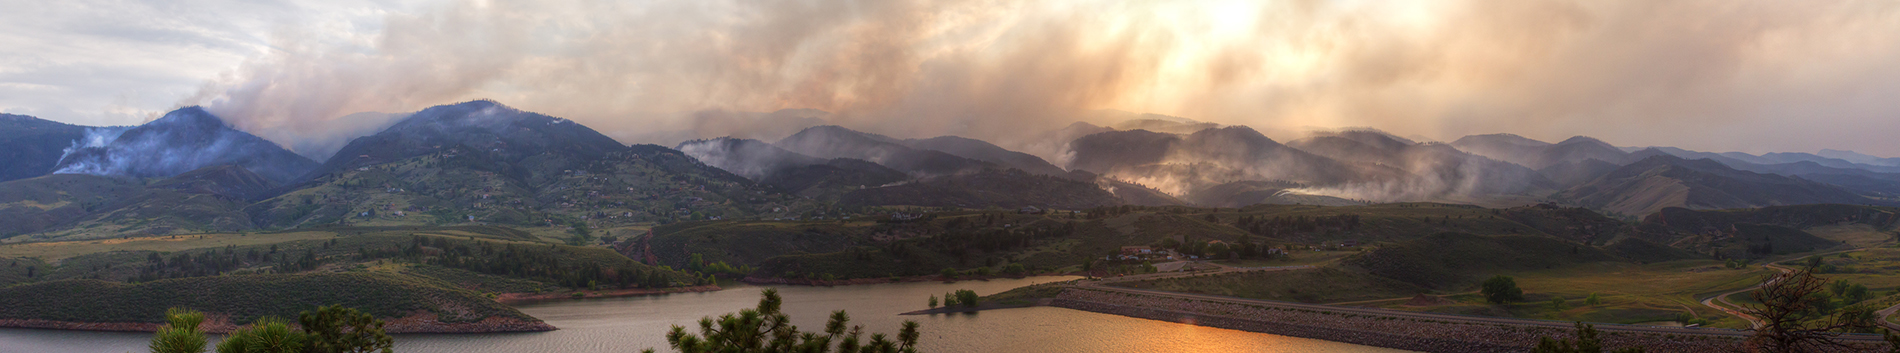 Panoramic View of the High Park Wildfire in the Colorado Rocky Mountains